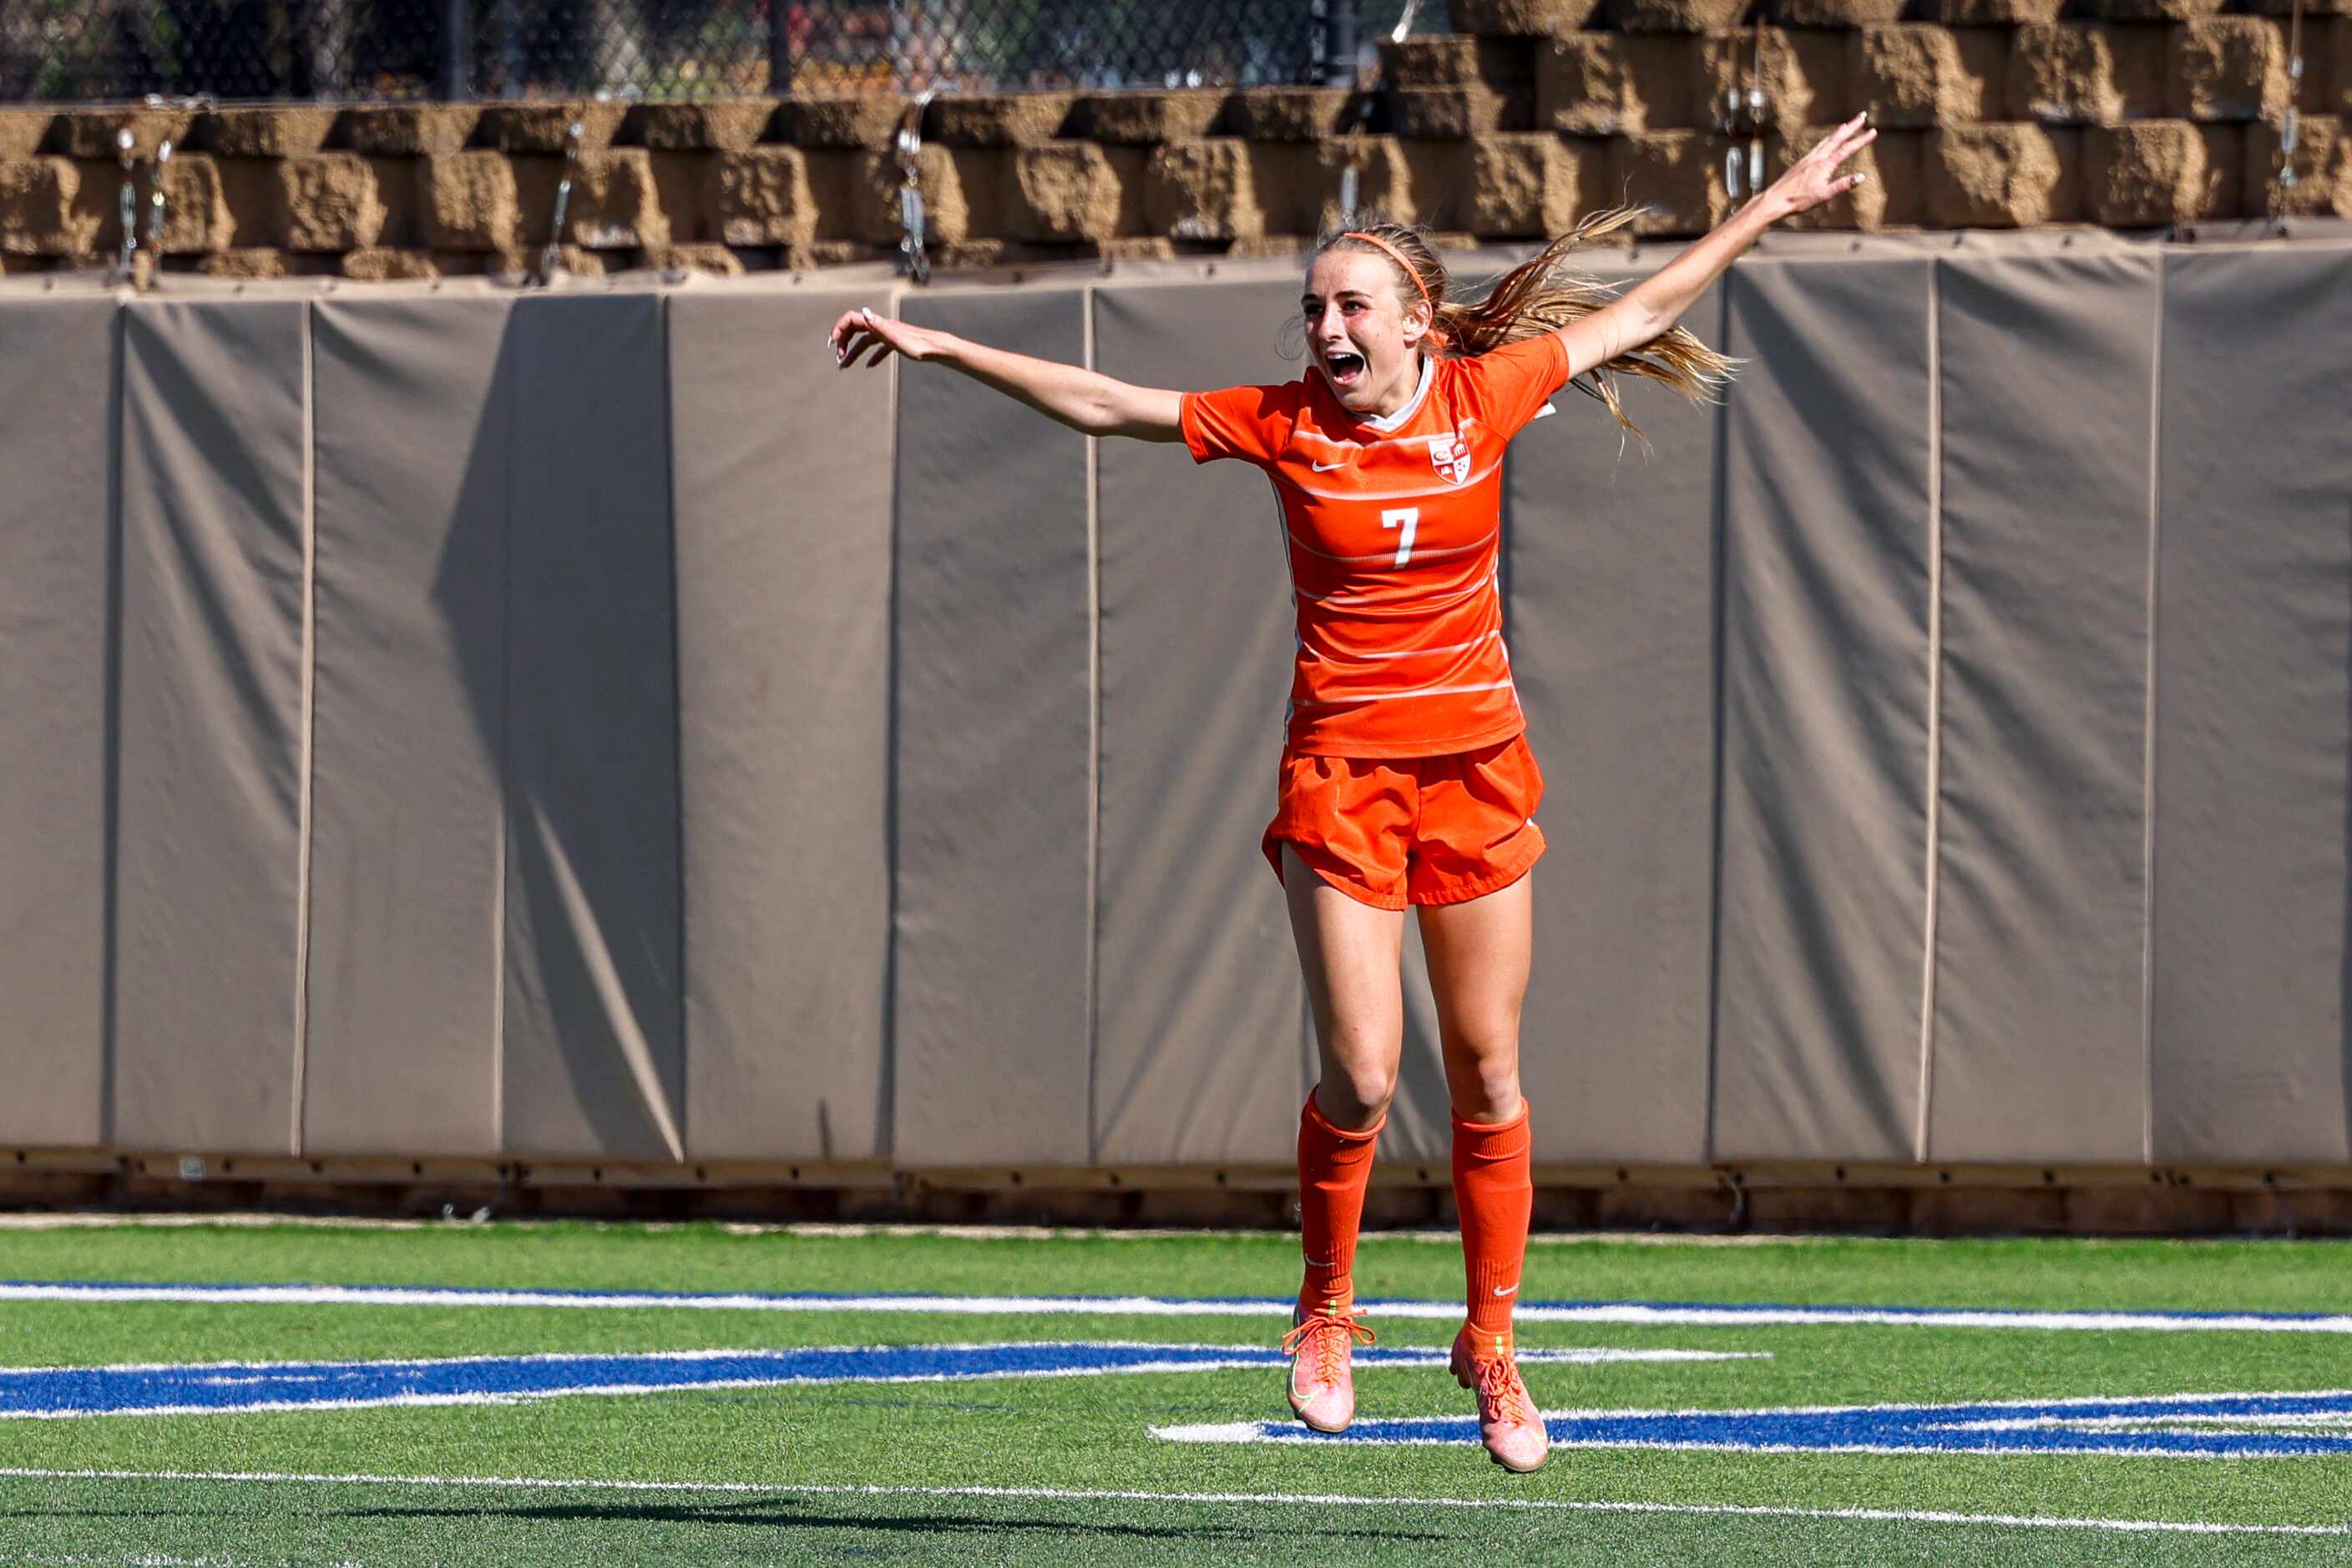 Celina midfielder Lexi Tuite (7) reacts after scoring the winning goal in the Class 4A girls...